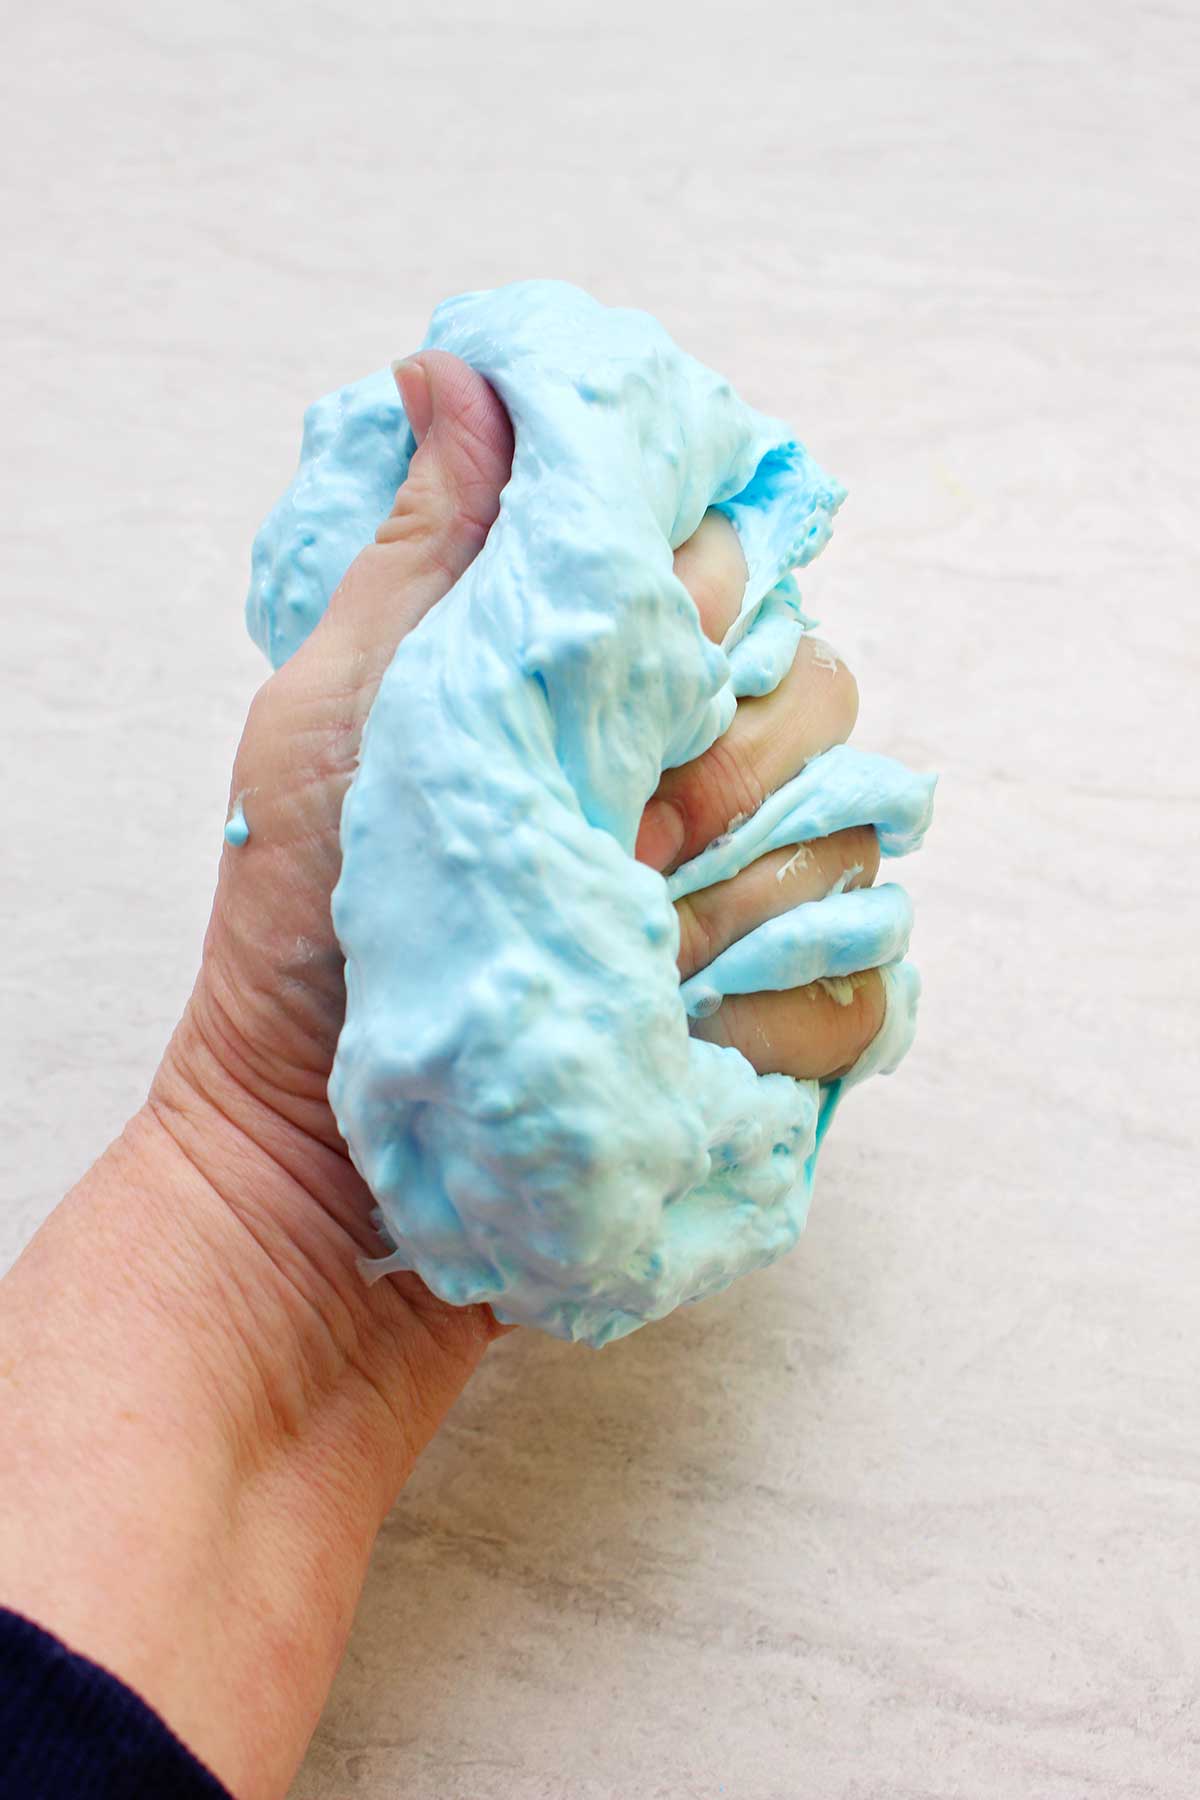 Hand squeezing the a completed batch of light blue fluffy slime.